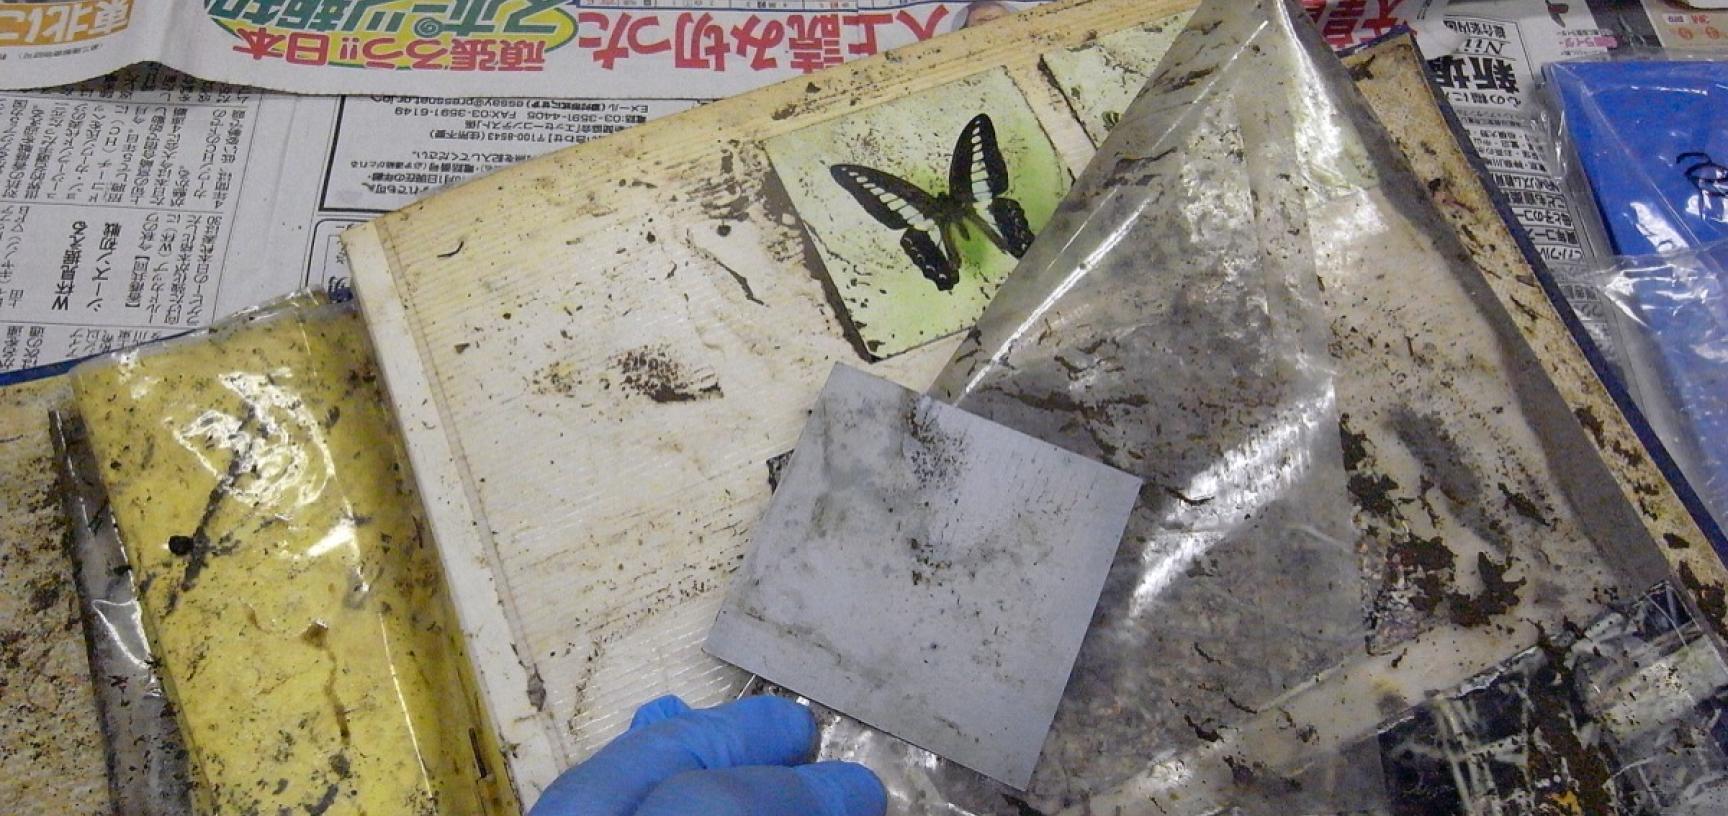 Removing prints from a damaged album. (Copyright RD3 Project/Rikuzentakata City Museum)